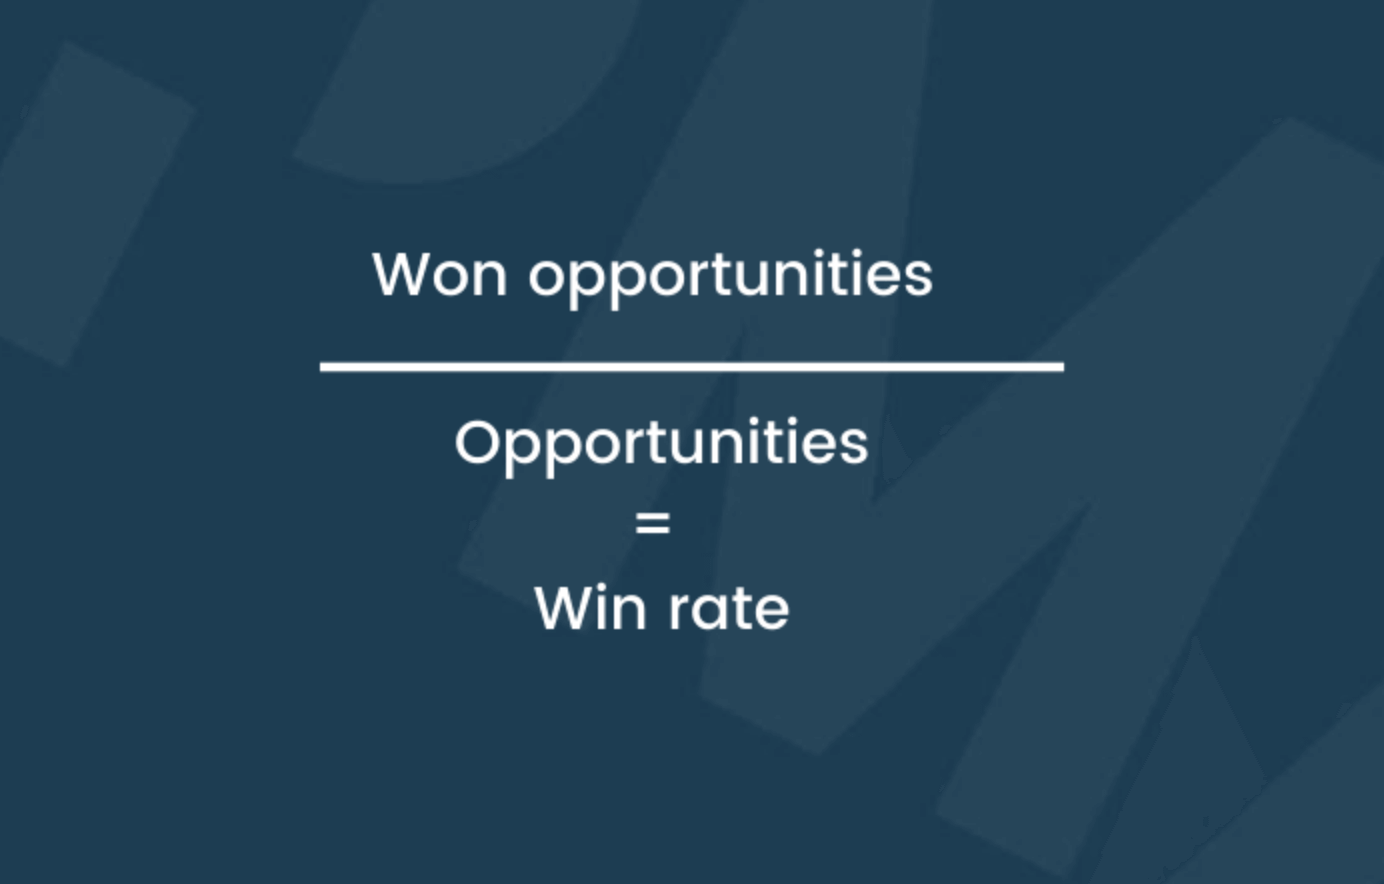 Win rate formula is: won opportunities divided by opportunities, equals win rate.